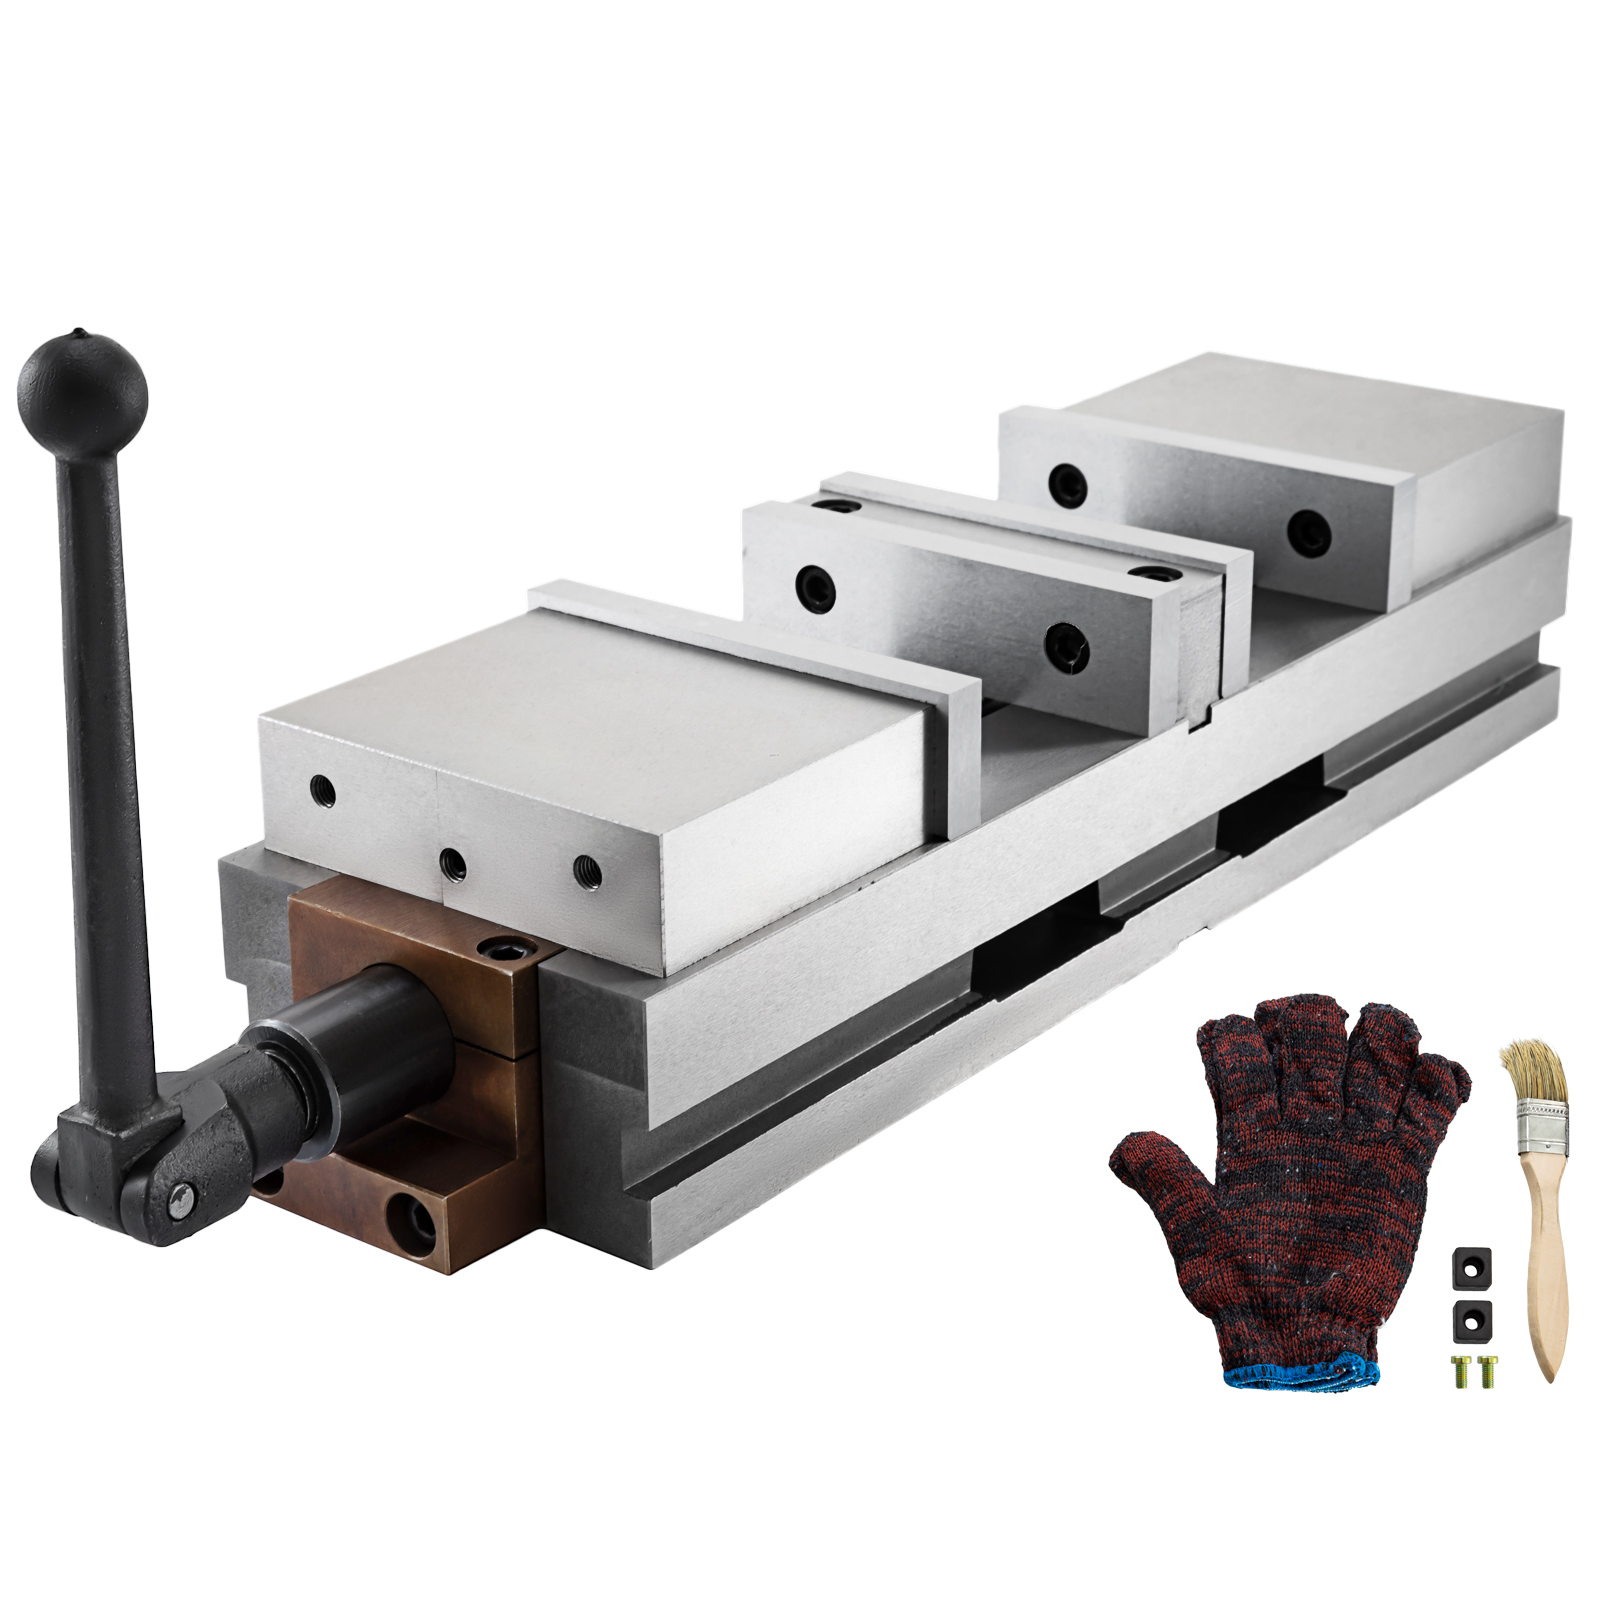 6" Lockdown Vise Cnc Vise Double Station For Milling Machine 2 Movable Jaws от Vevor Many GEOs